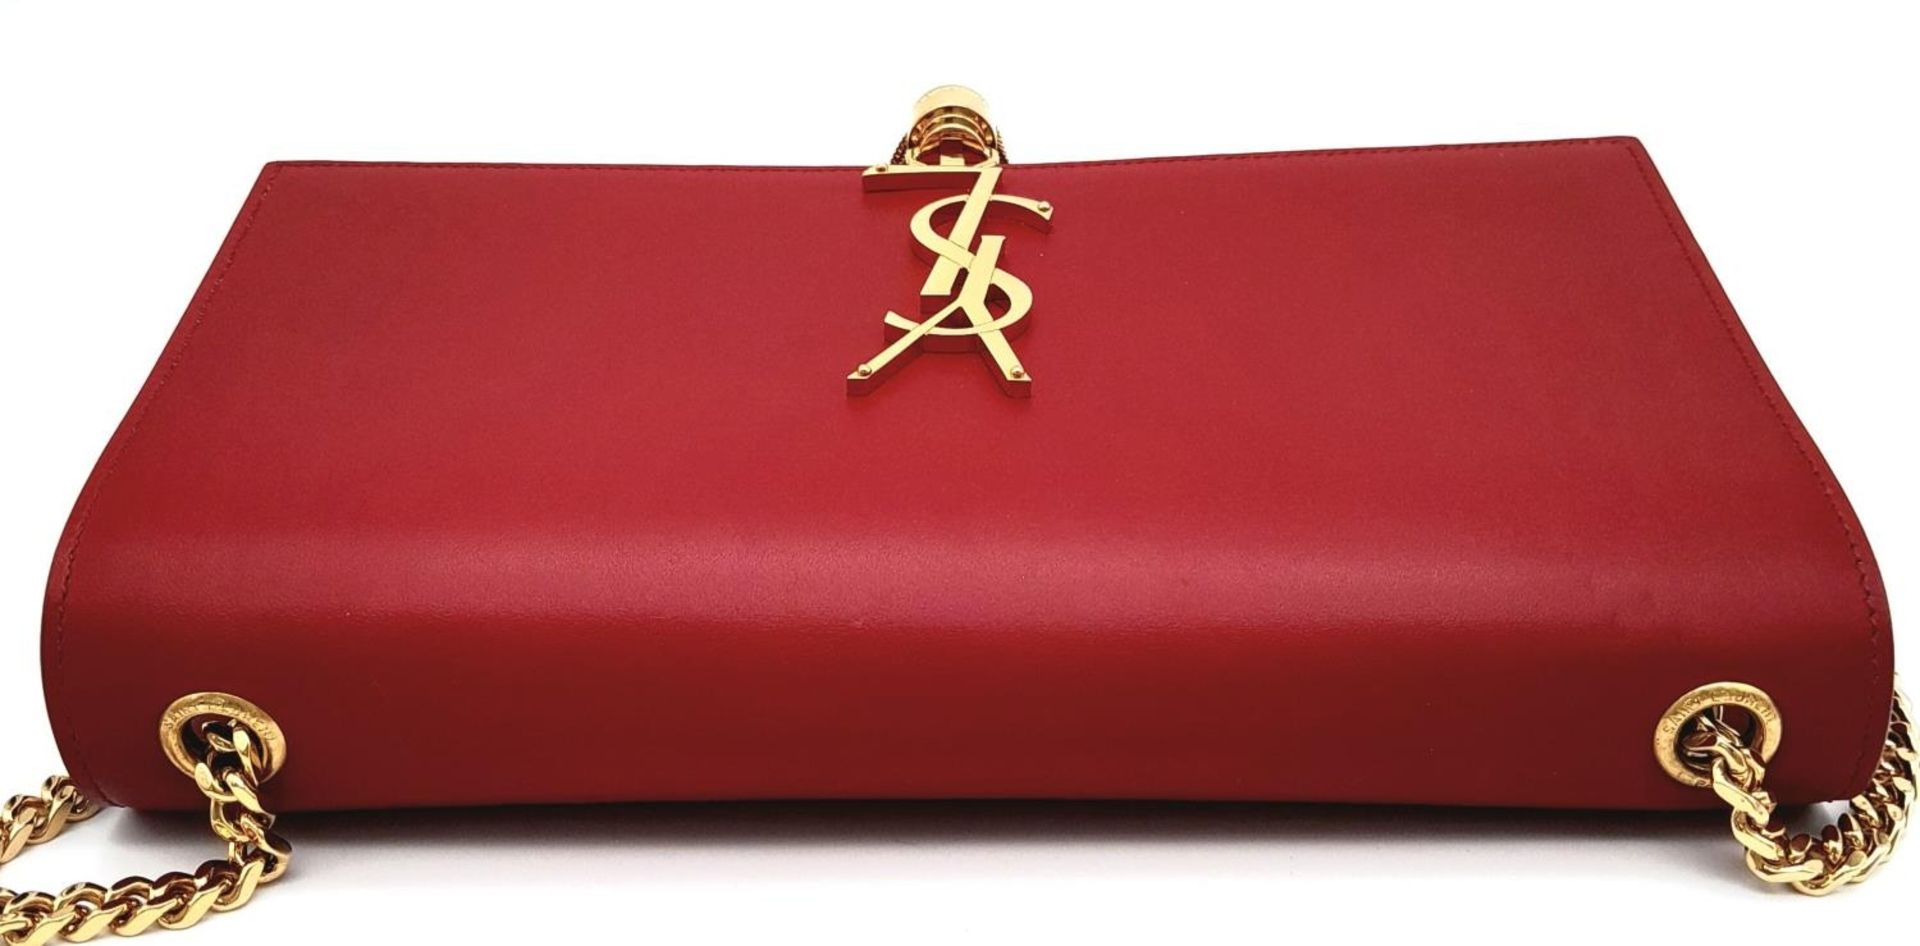 A YSL Red Kate Tassel Crossbody Bag. Leather exterior with gold-toned hardware, the iconic YSL logo, - Image 3 of 12